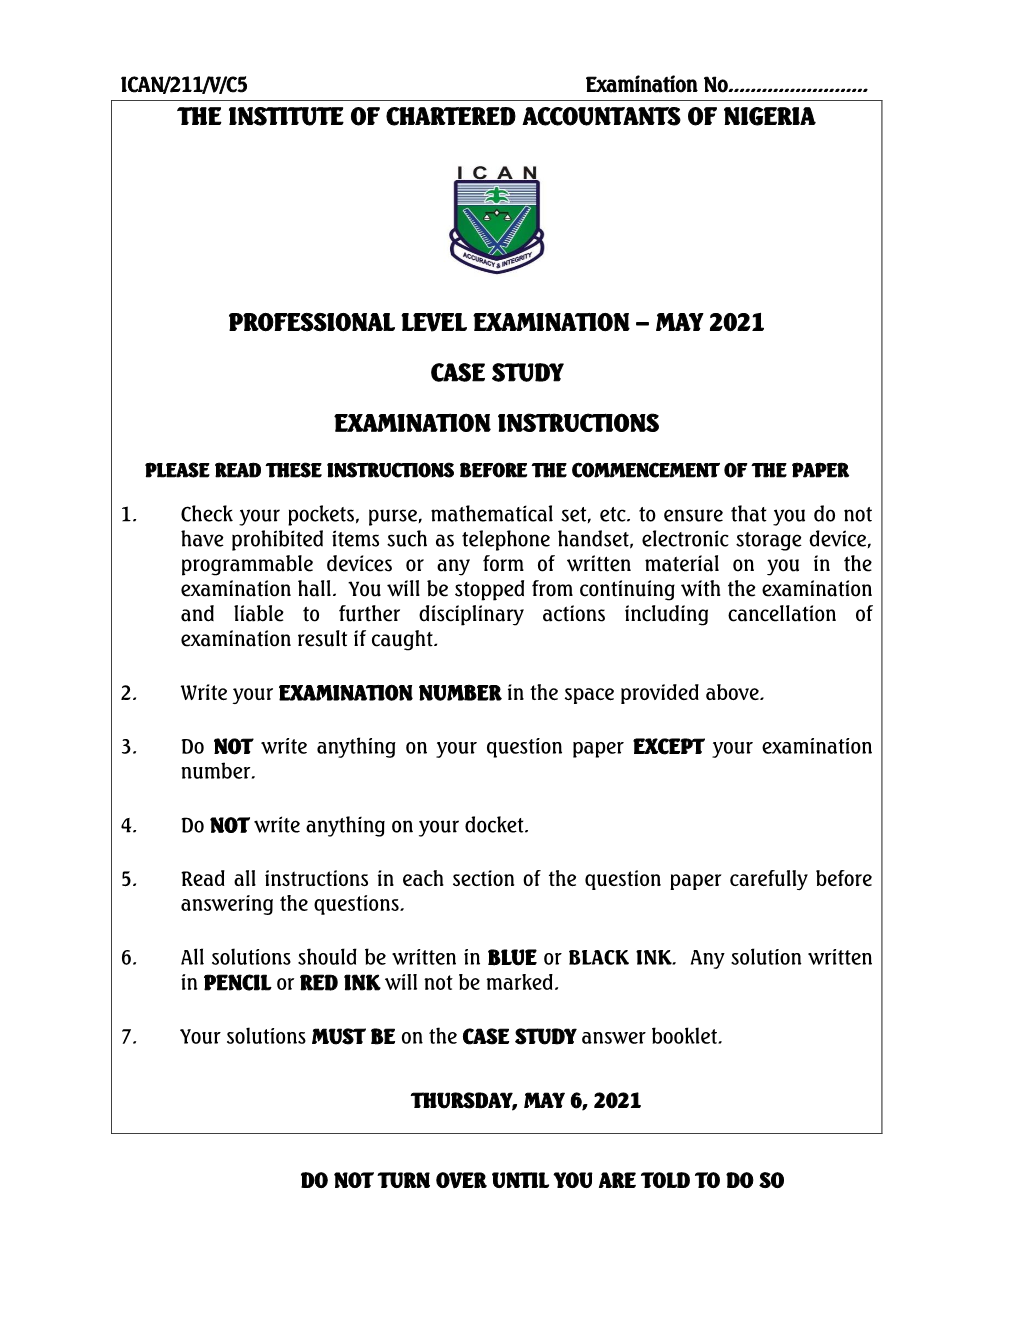 The Institute of Chartered Accountants of Nigeria Professional Level Examination – May 2021 Case Study Examination Instruction